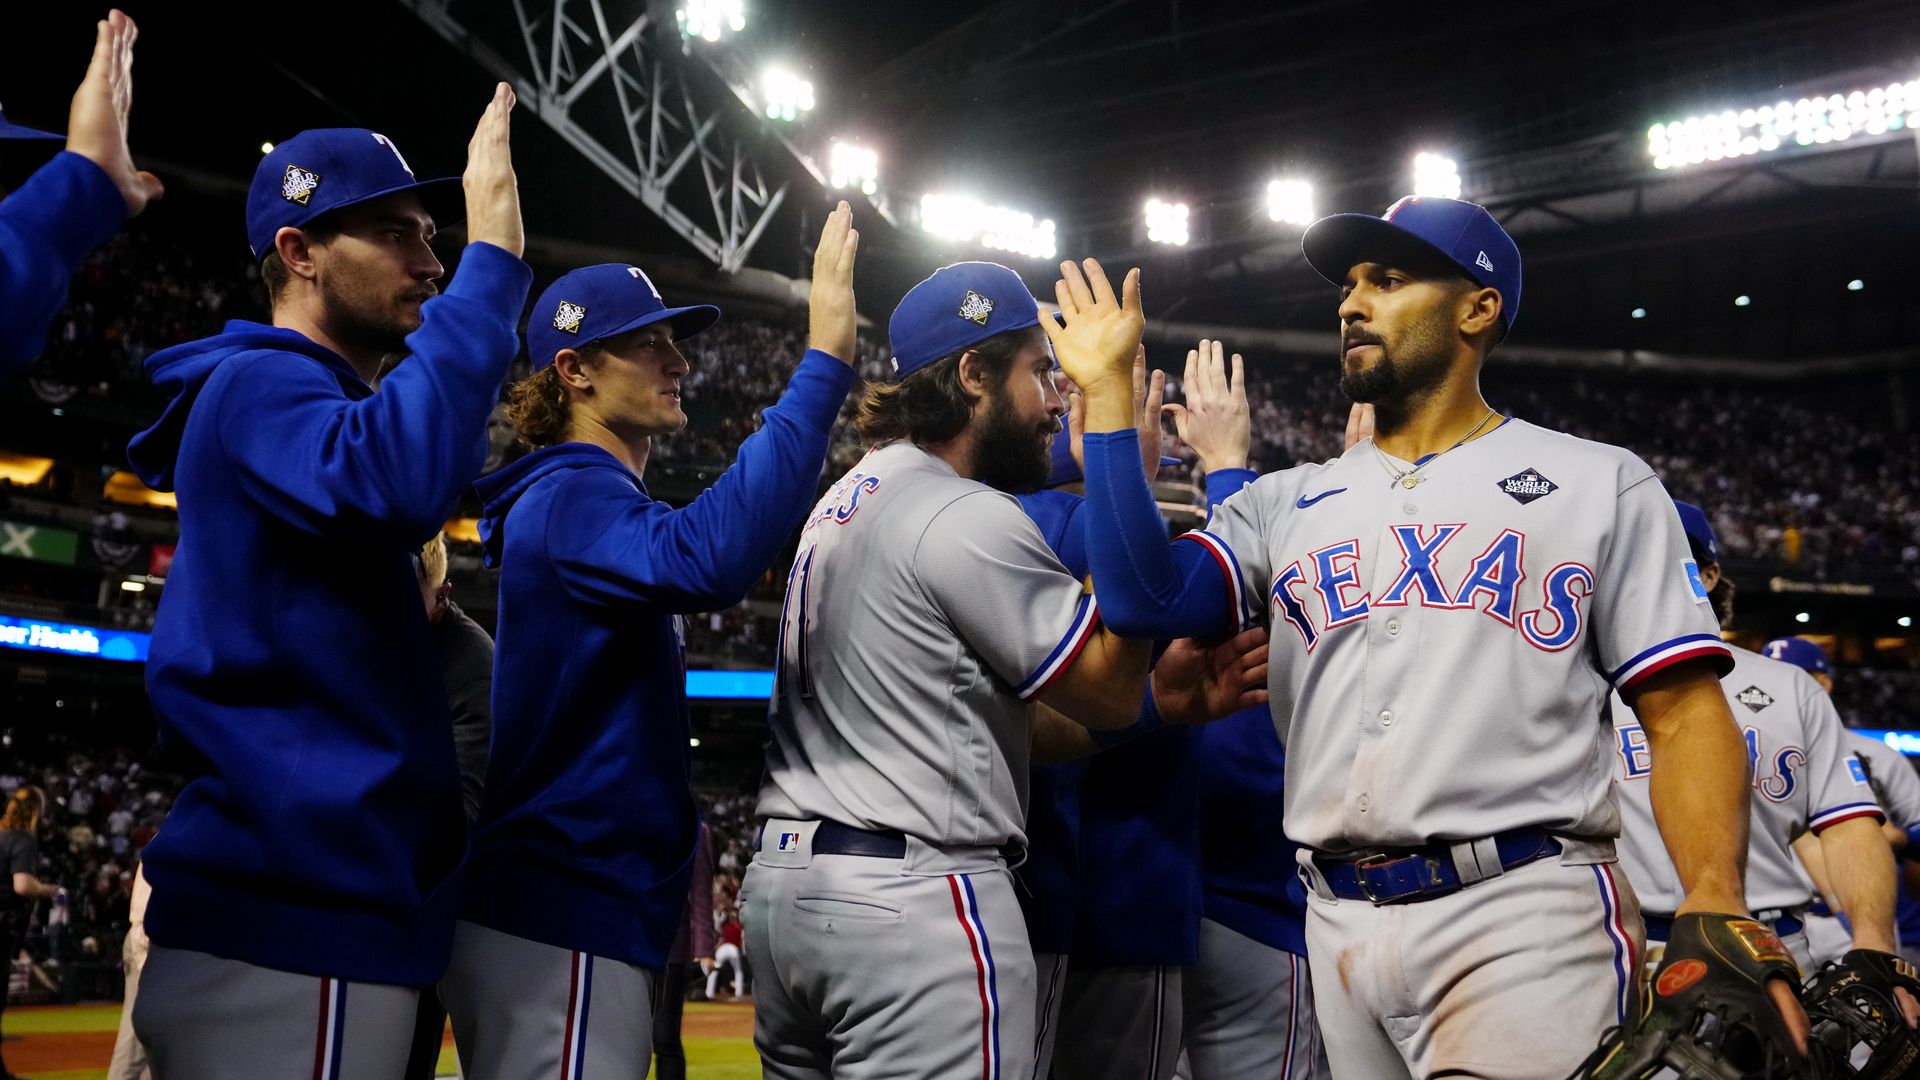 Texas Rangers secondbaseman Marcus Semien celebrates after the team won Game 4 of the World Series